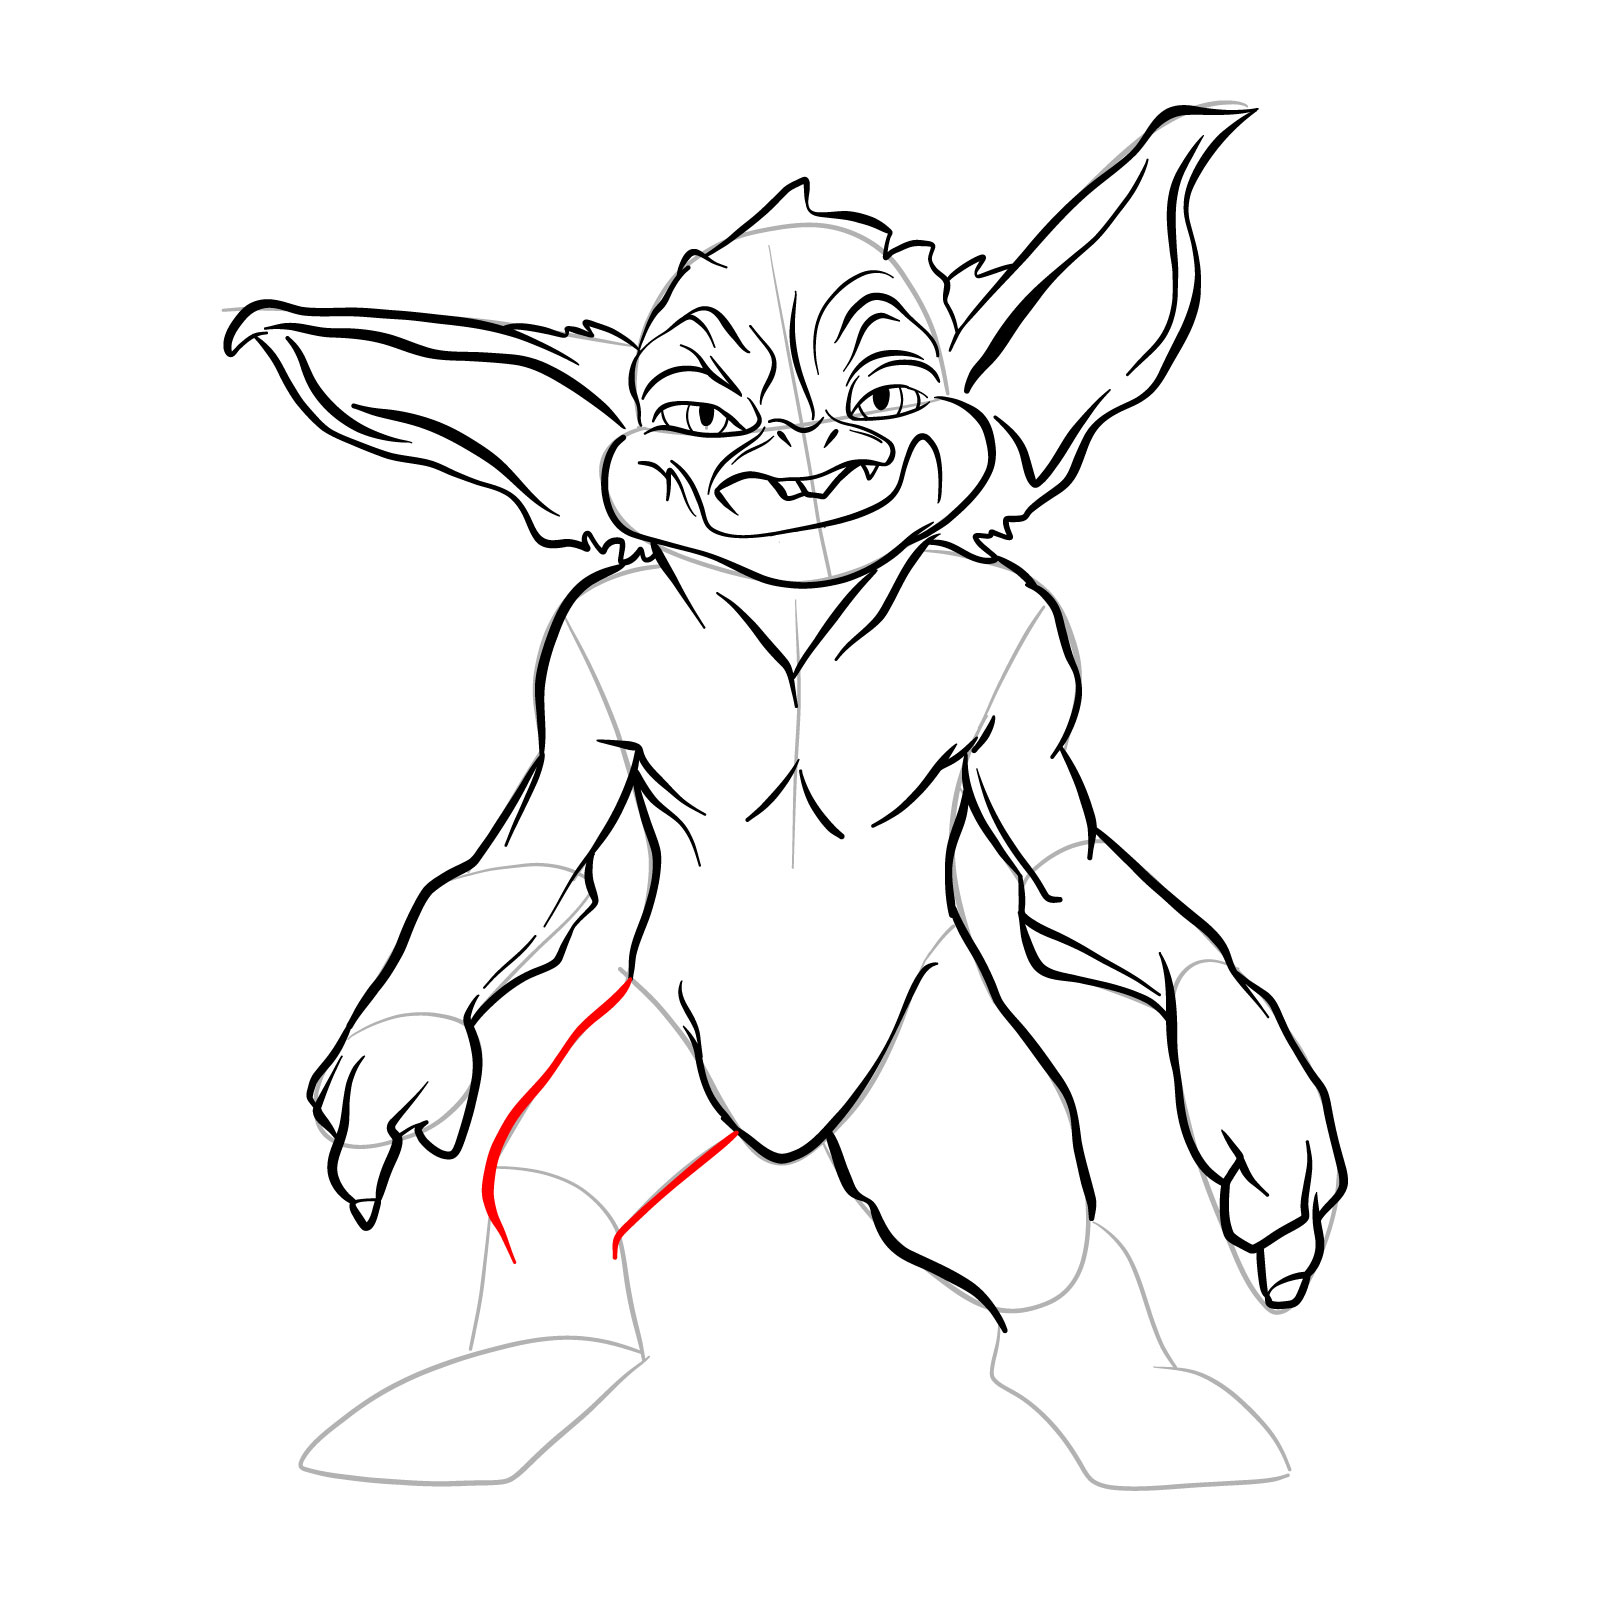 How to draw a Goblin - step 24